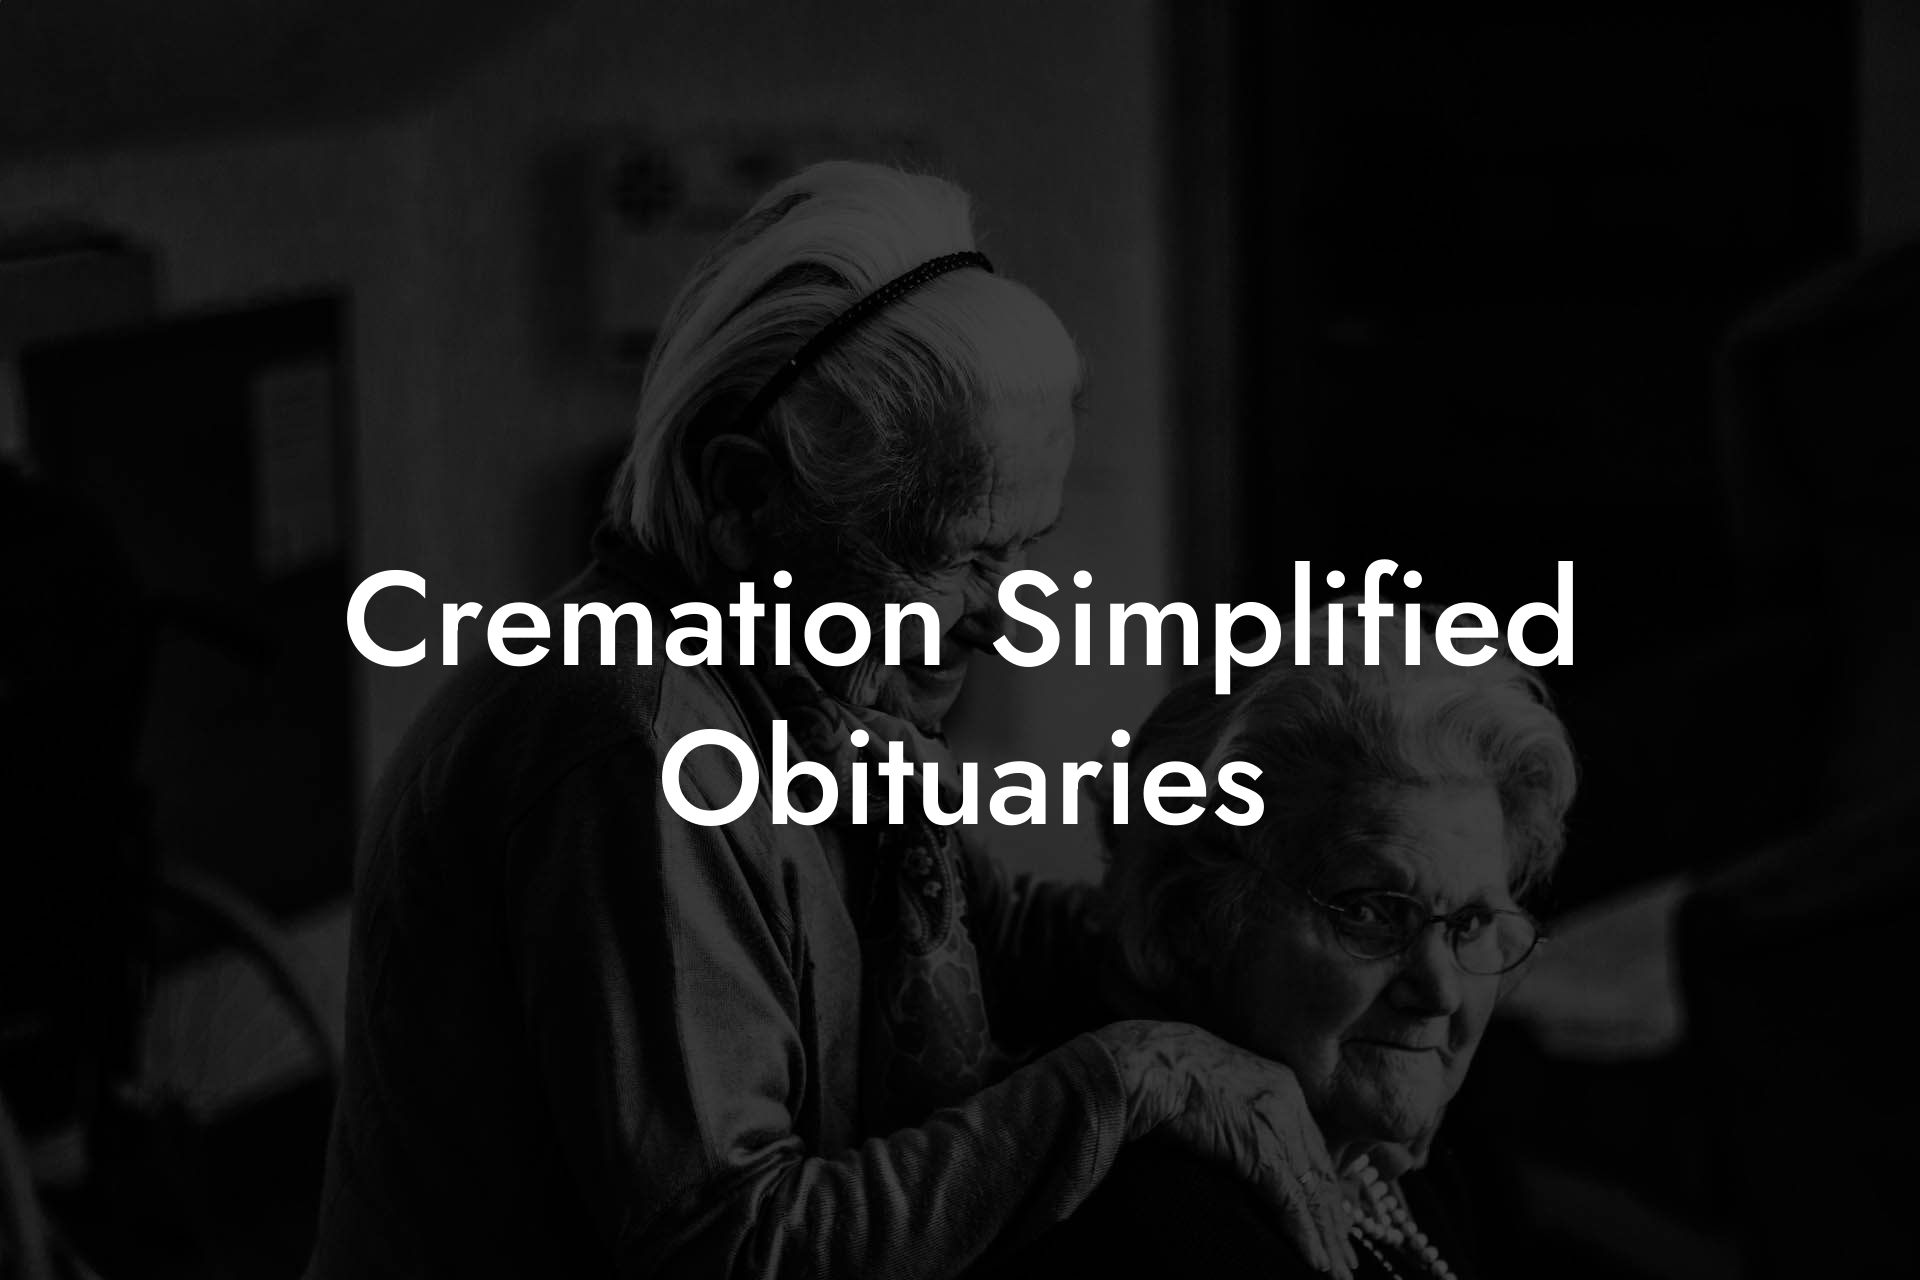 Cremation Simplified Obituaries